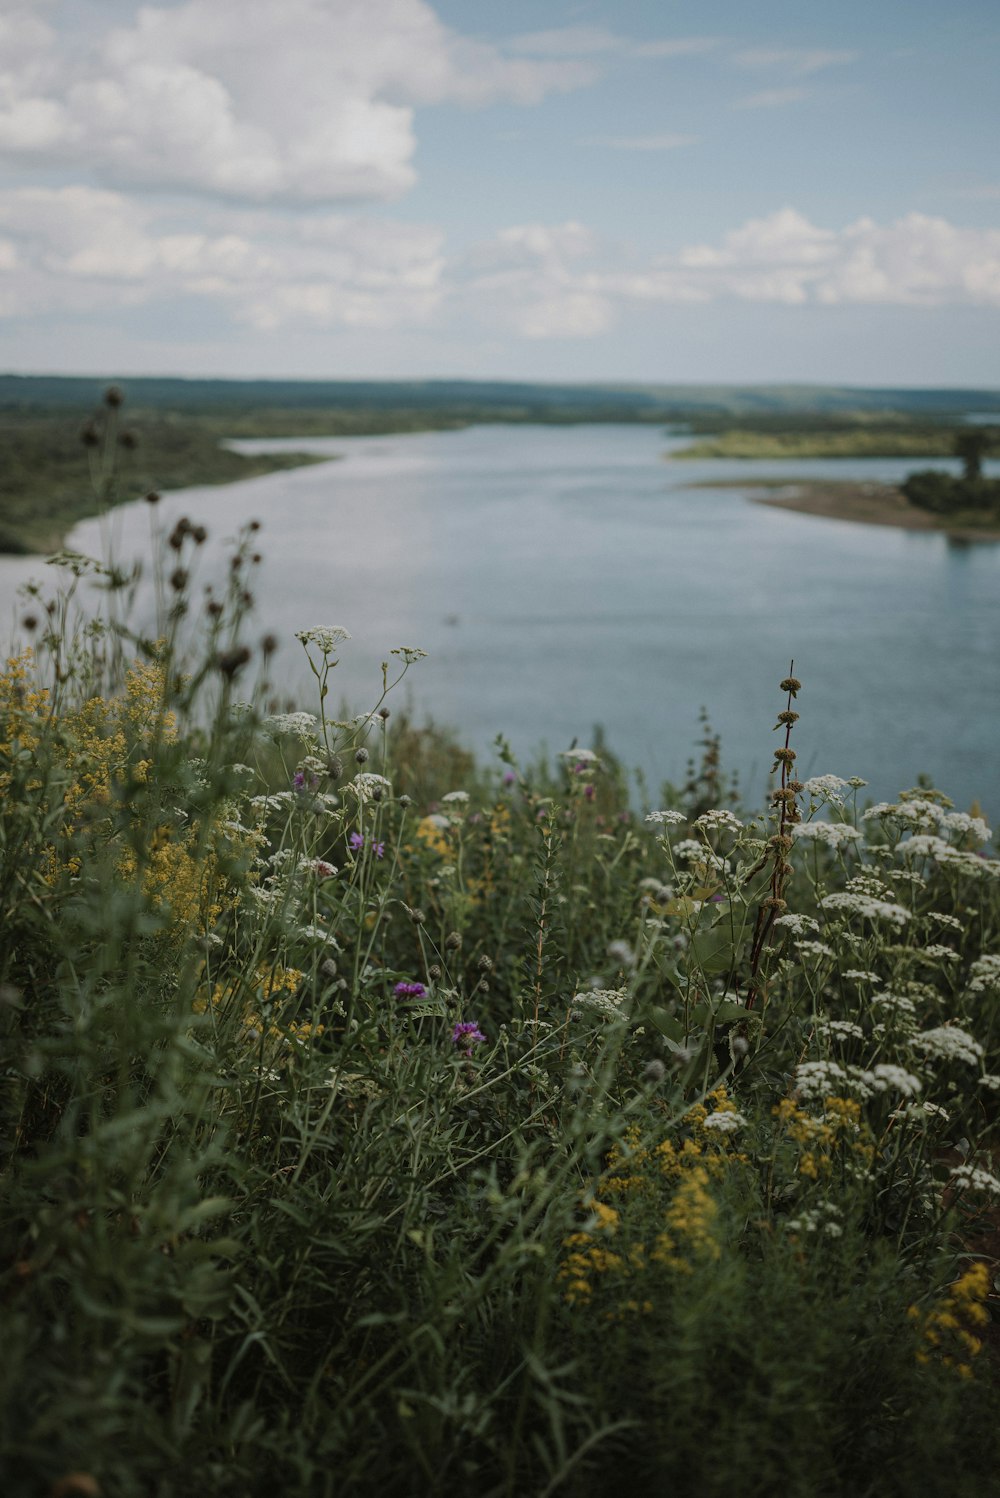 a view of a body of water with wildflowers in the foreground